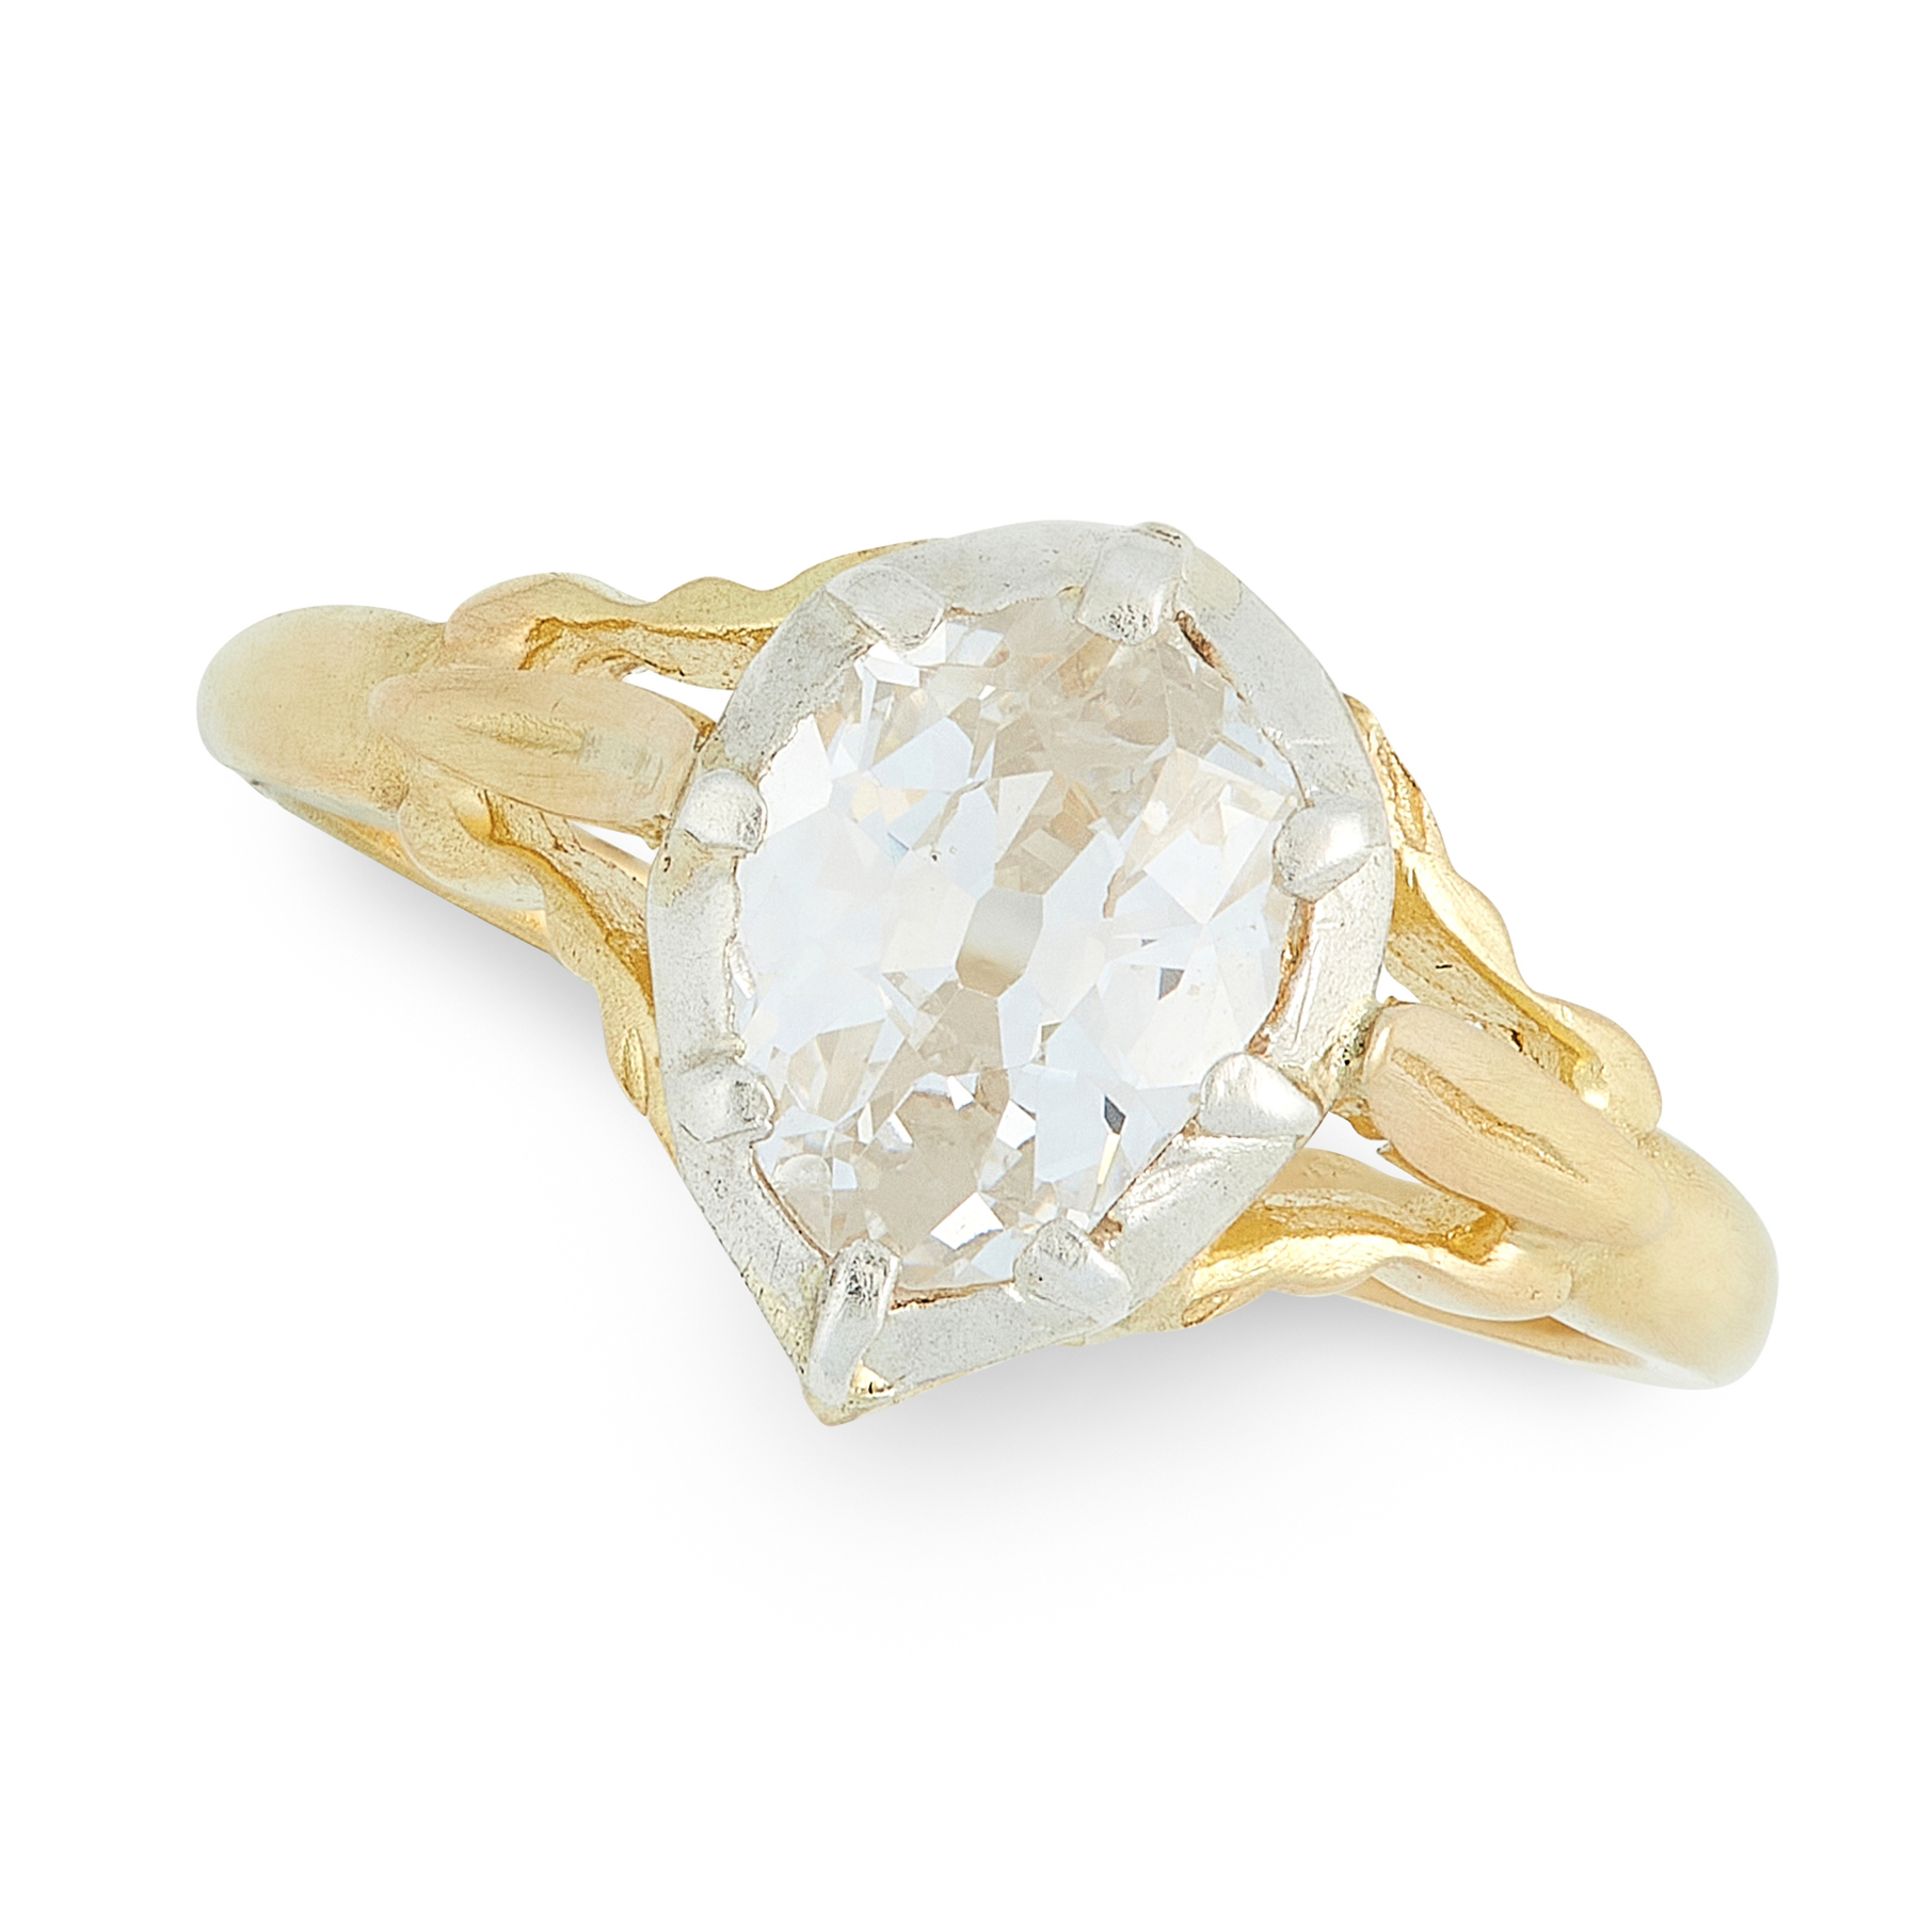 A DIAMOND DRESS RING in high carat yellow gold and silver, in the Georgian style, set with a pear